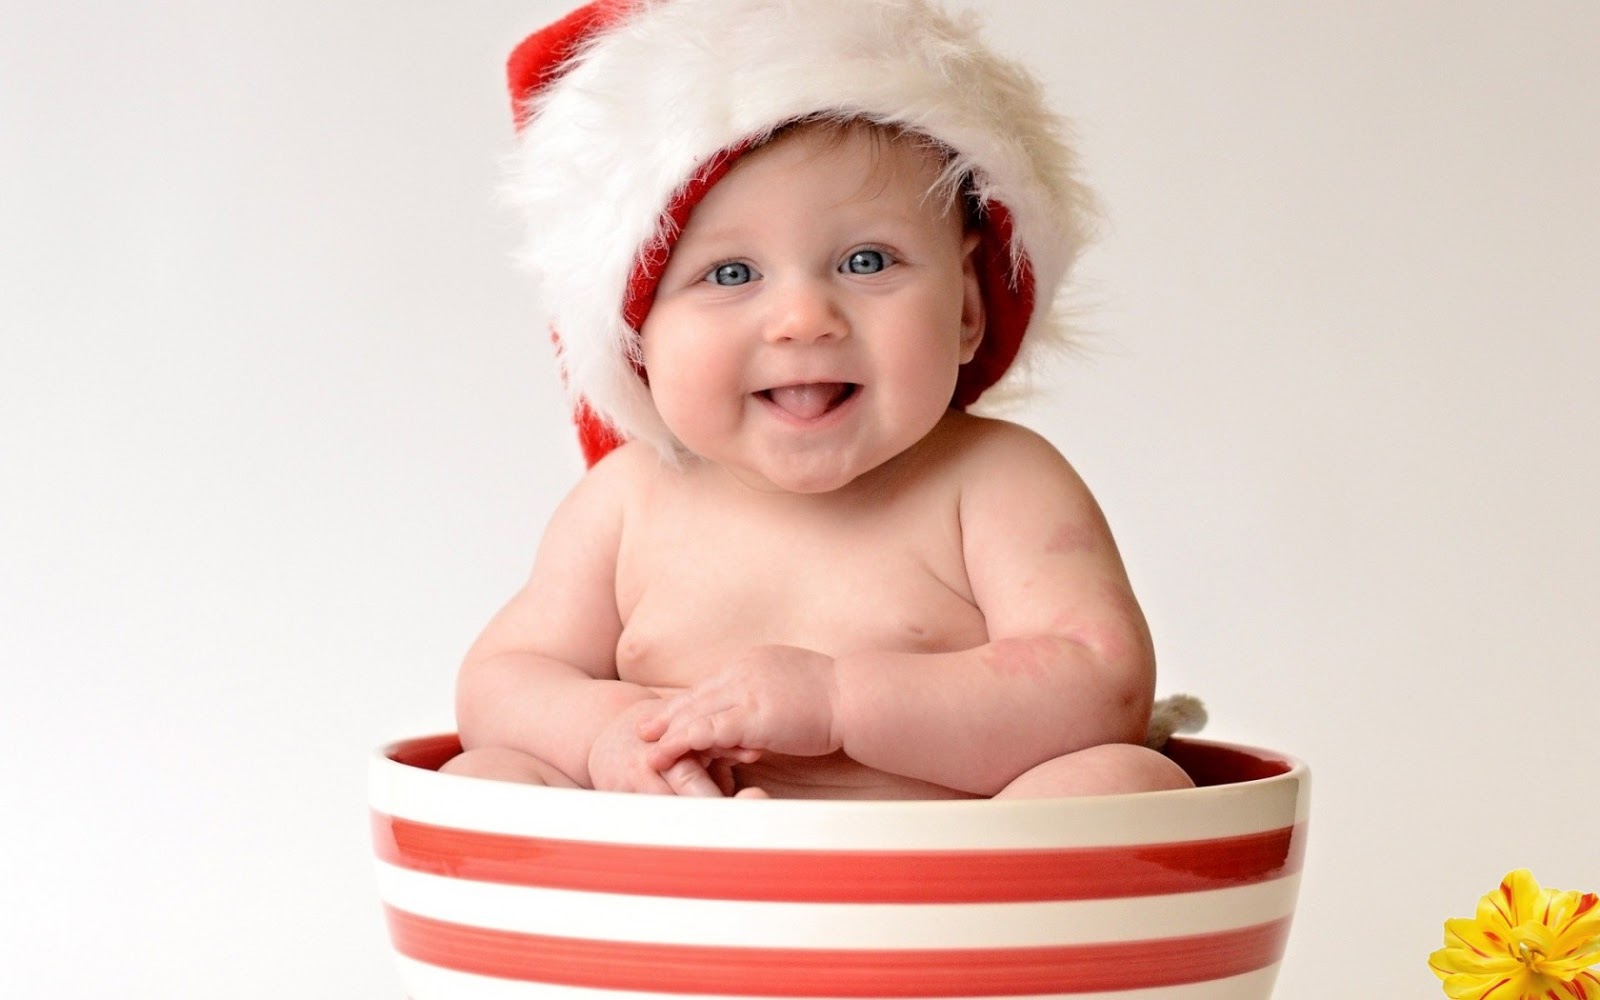 Cute Baby Smile HD Wallpapers of Smiling Baby iMage Downloads